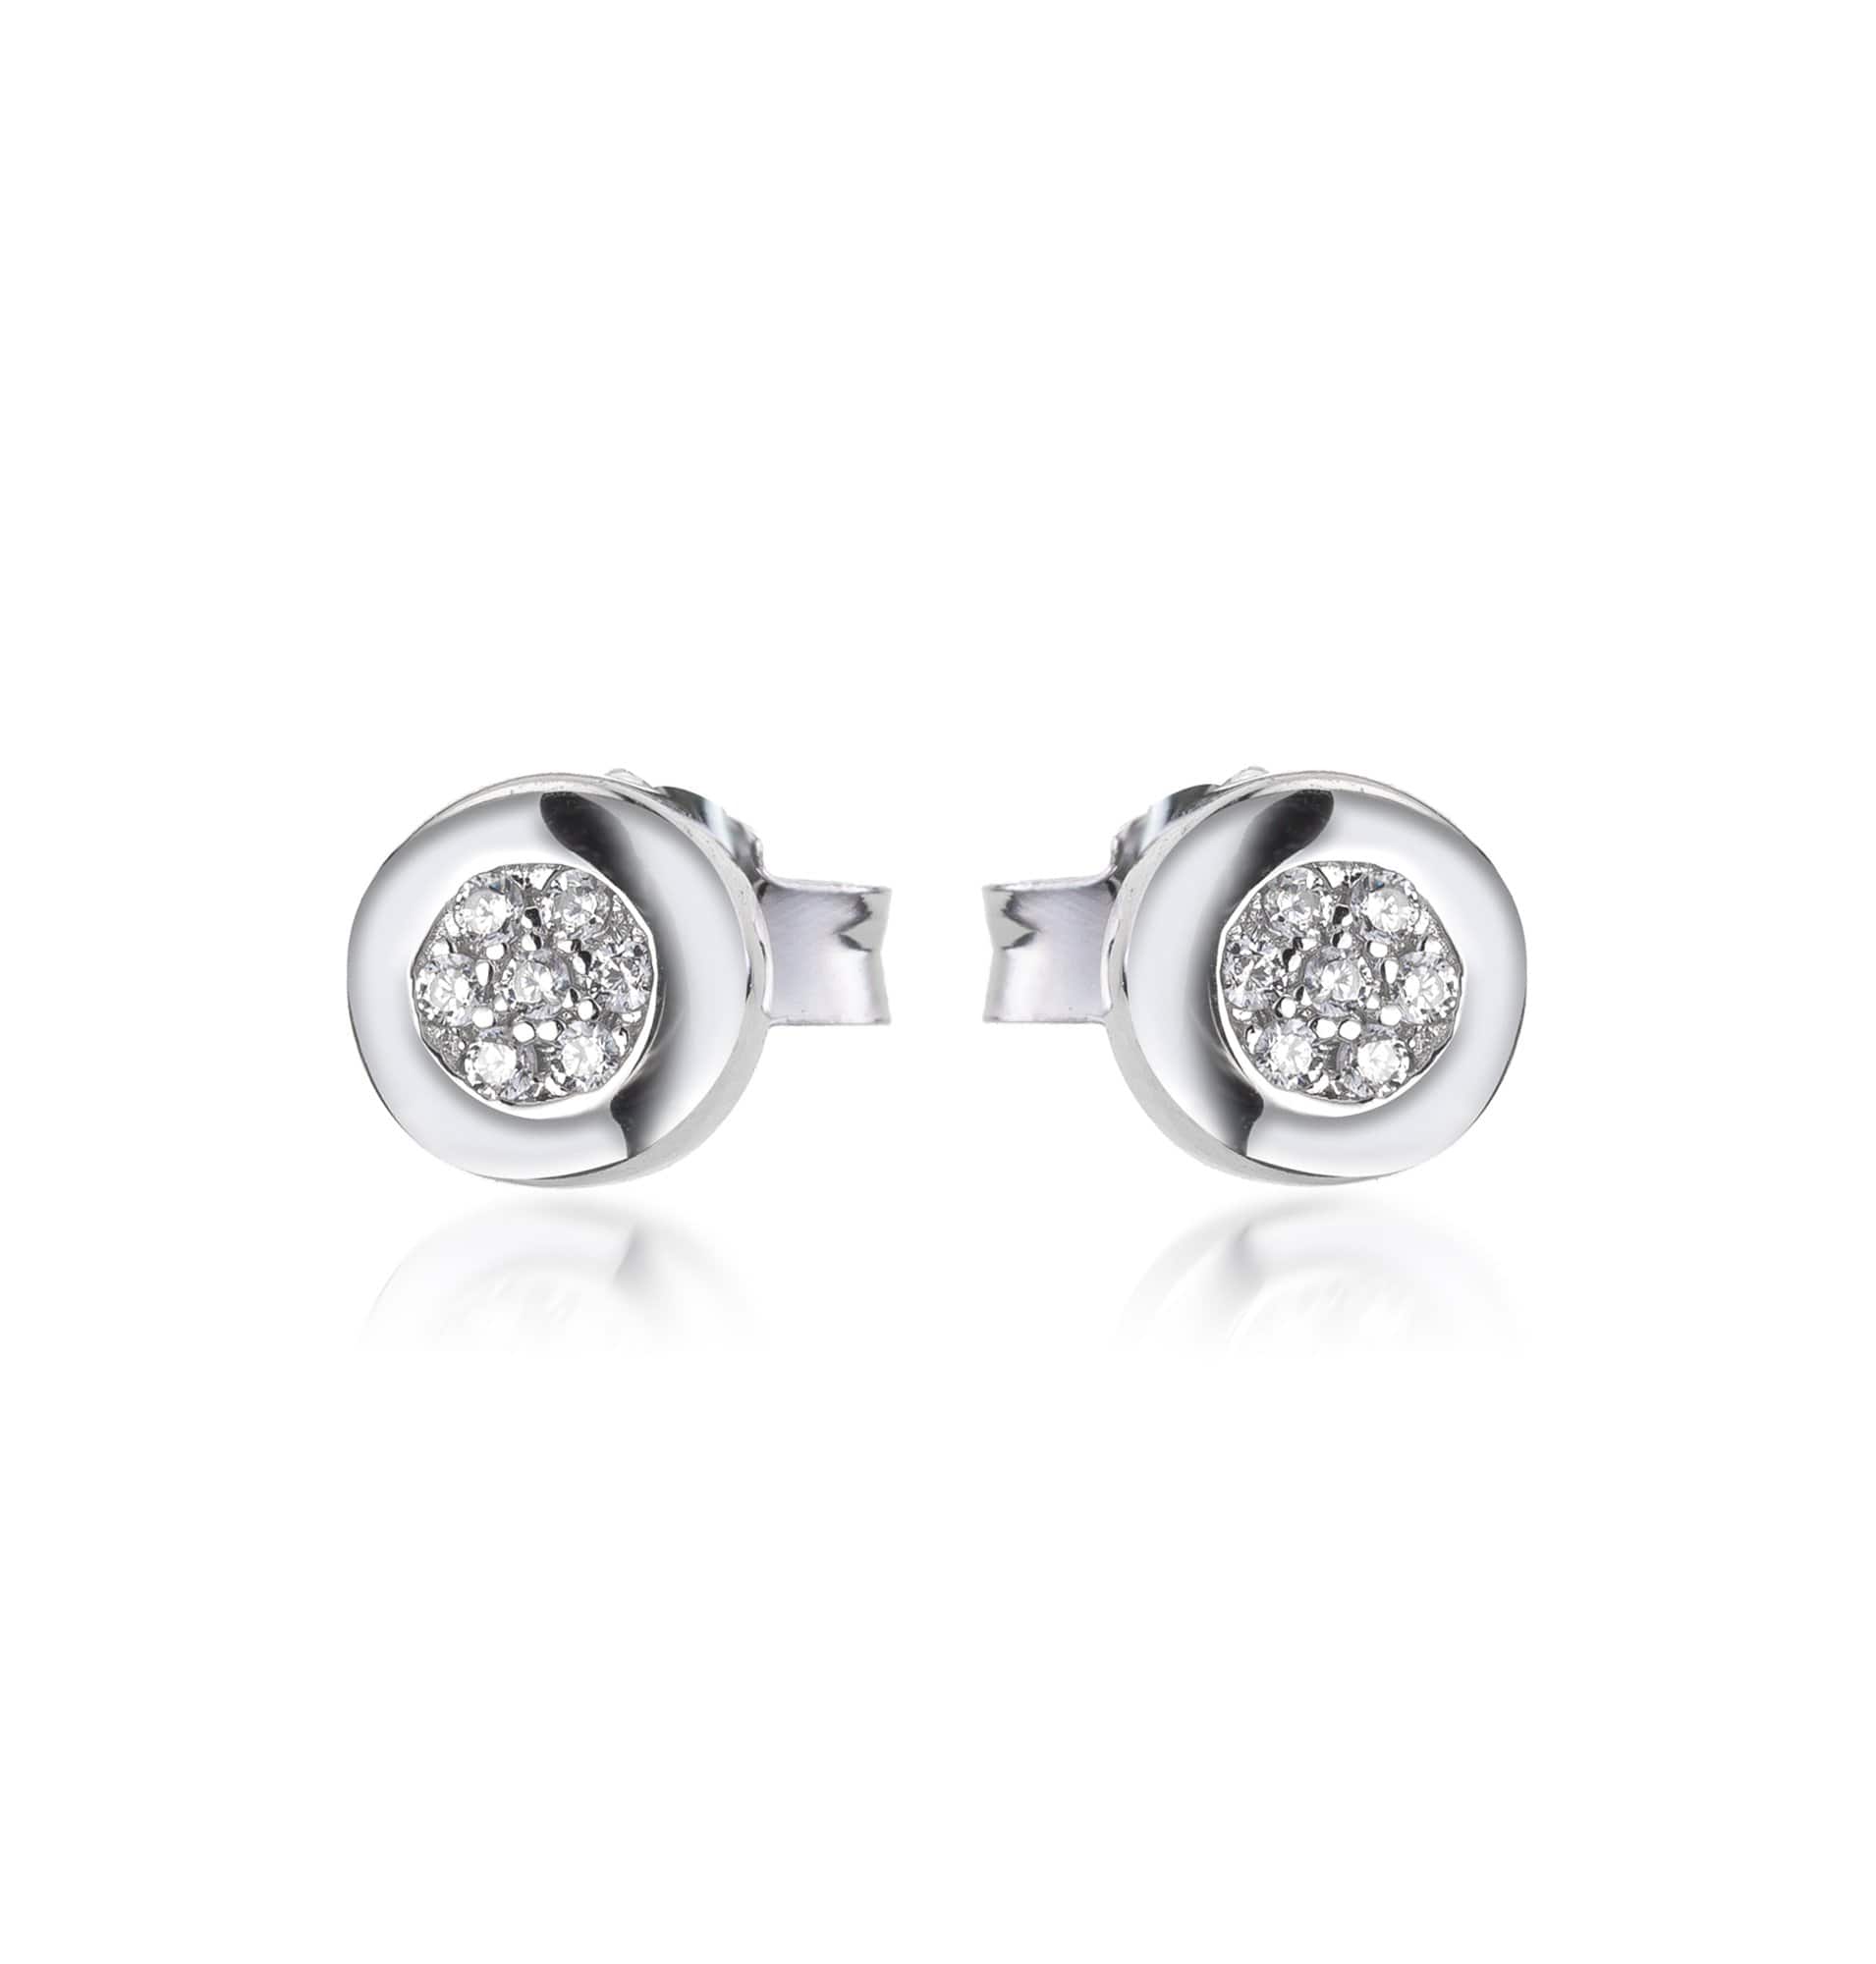 Lynora Jewellery Earring Sterling Silver Small Round stone-set Stud Sterling Silver